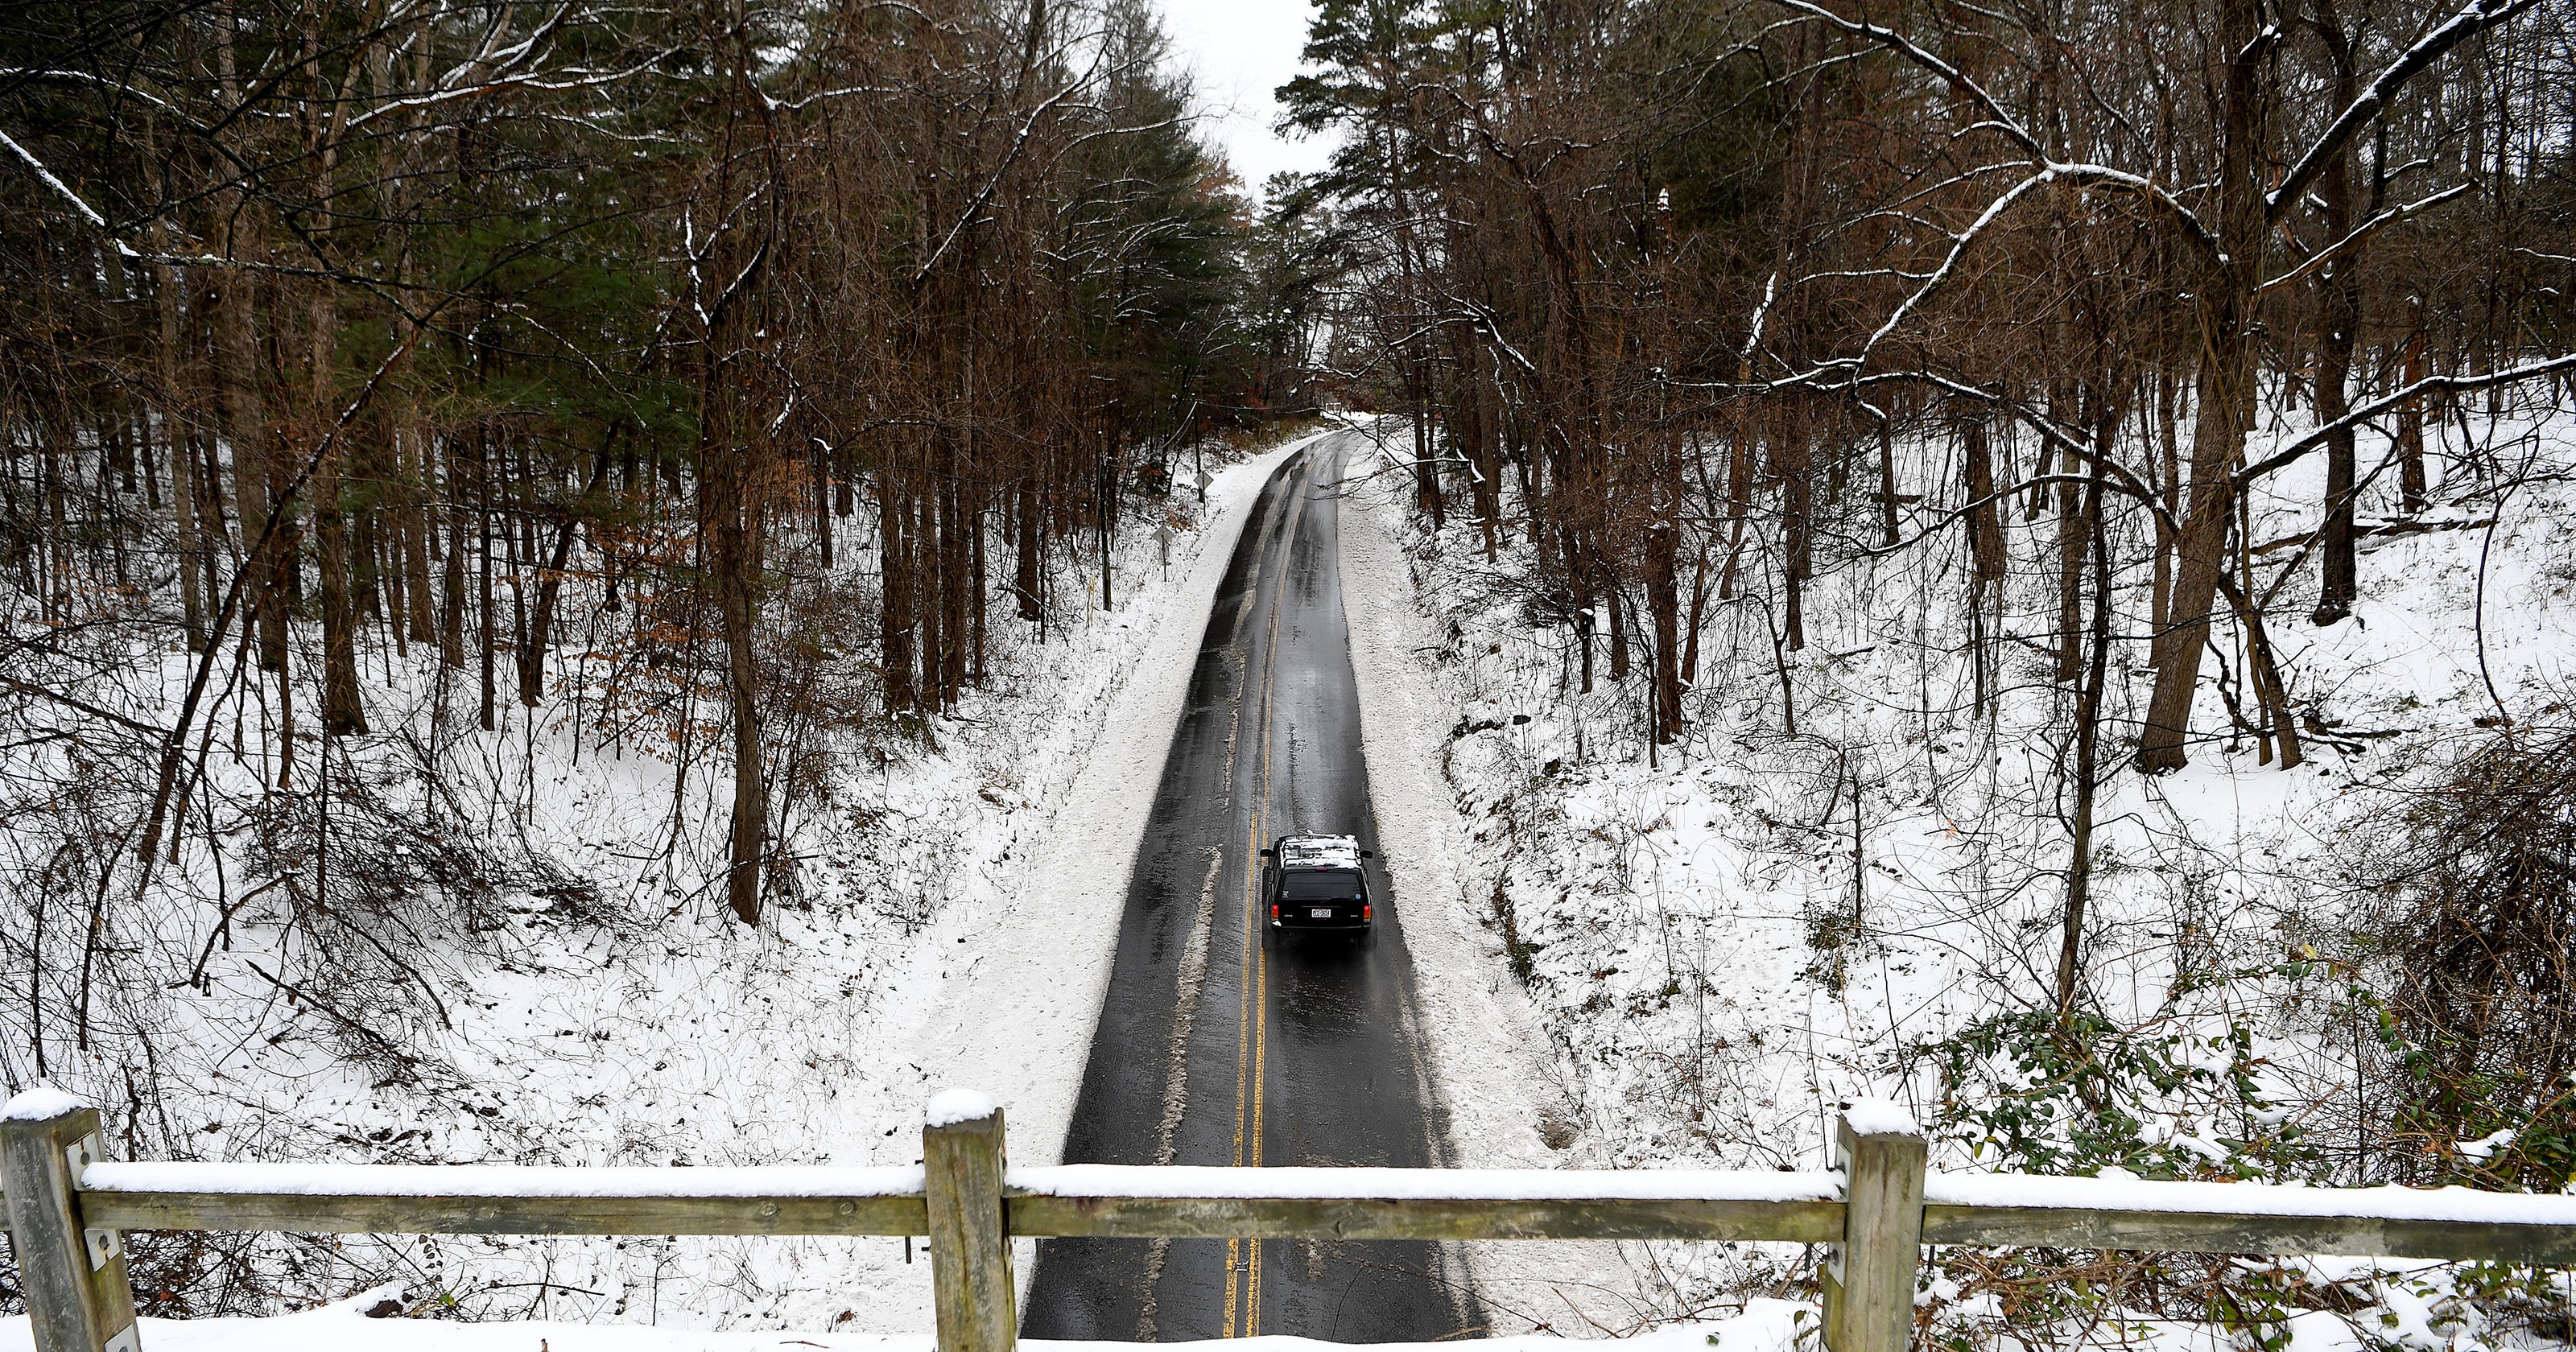 Blue Ridge Parkway in WNC still covered in snow, ice in many places